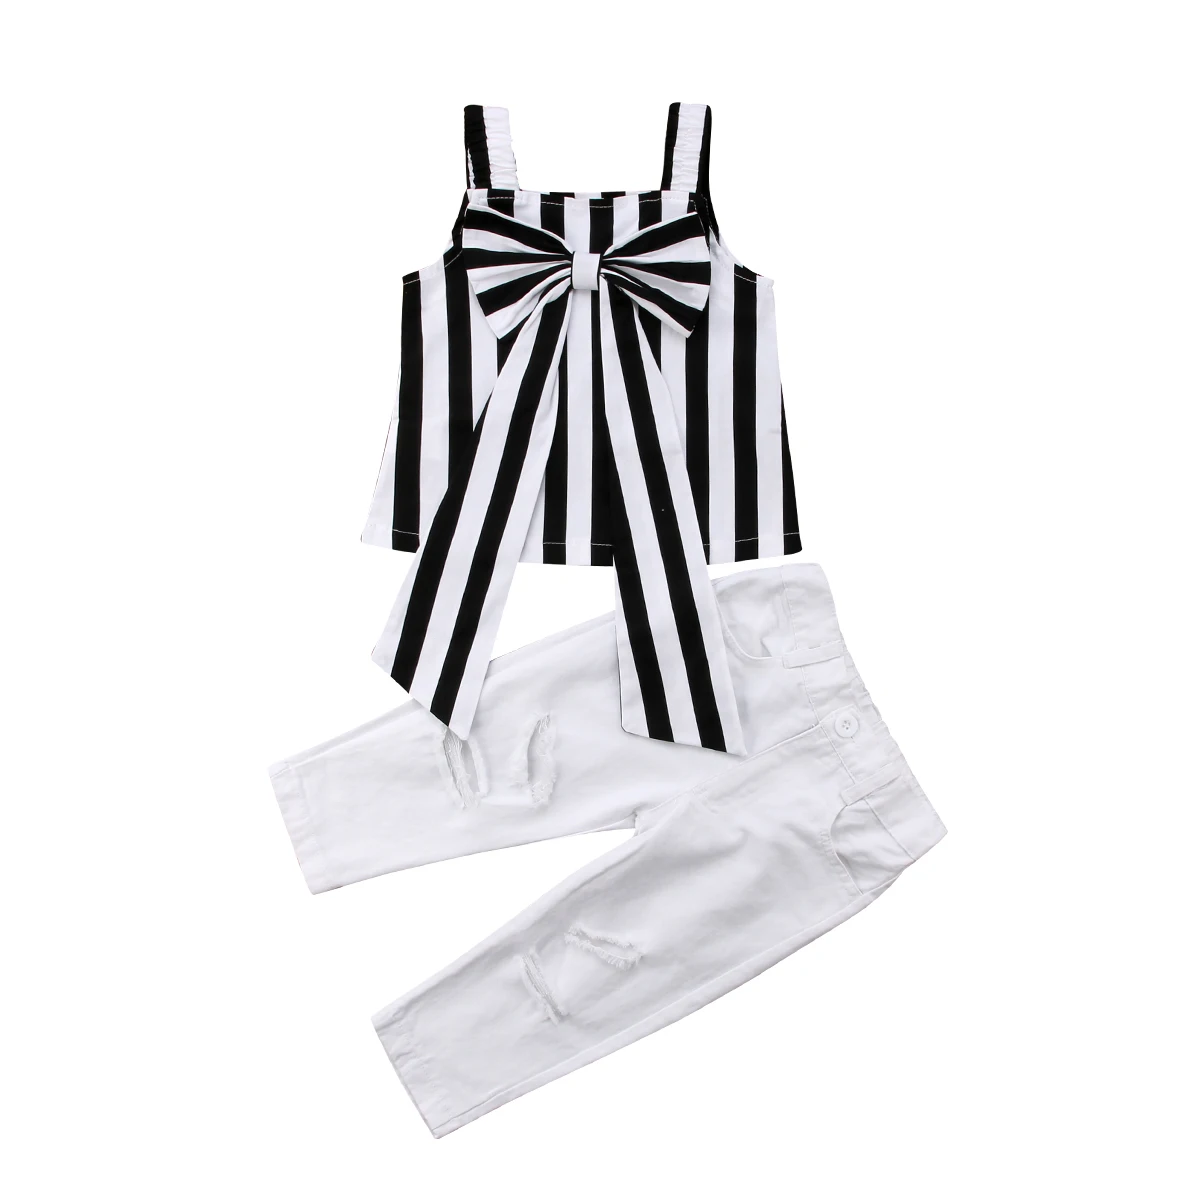 

2018 Newest Brand Toddler Kids Baby Girl Big Bow Stripe Sleeveless Tops +White Hole Pants Fashion Outfits Clothes 2PCS Set 2-7T